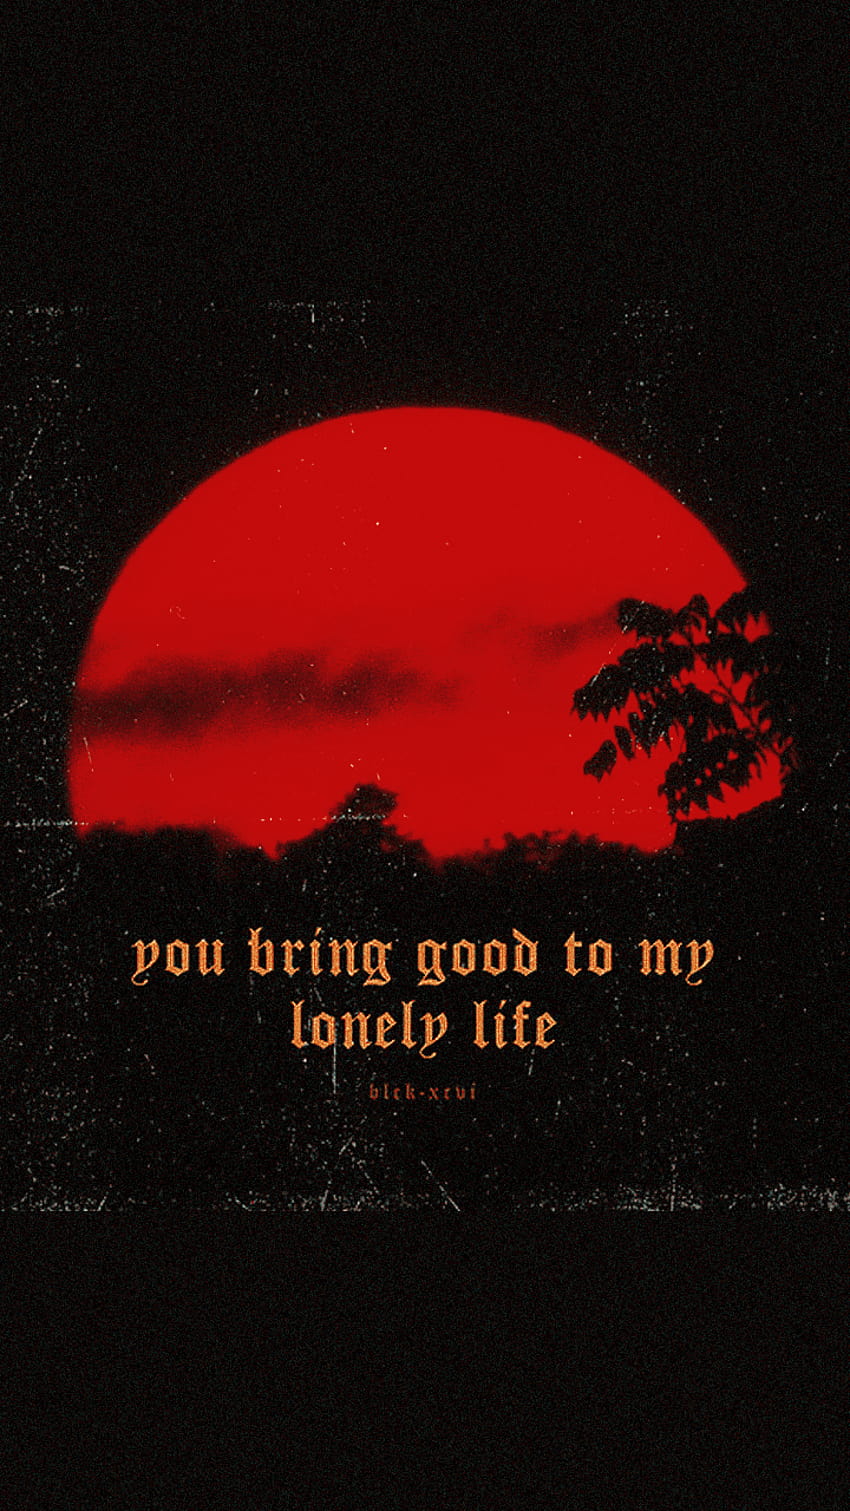 IPhone wallpaper with a red moon and the lyrics 